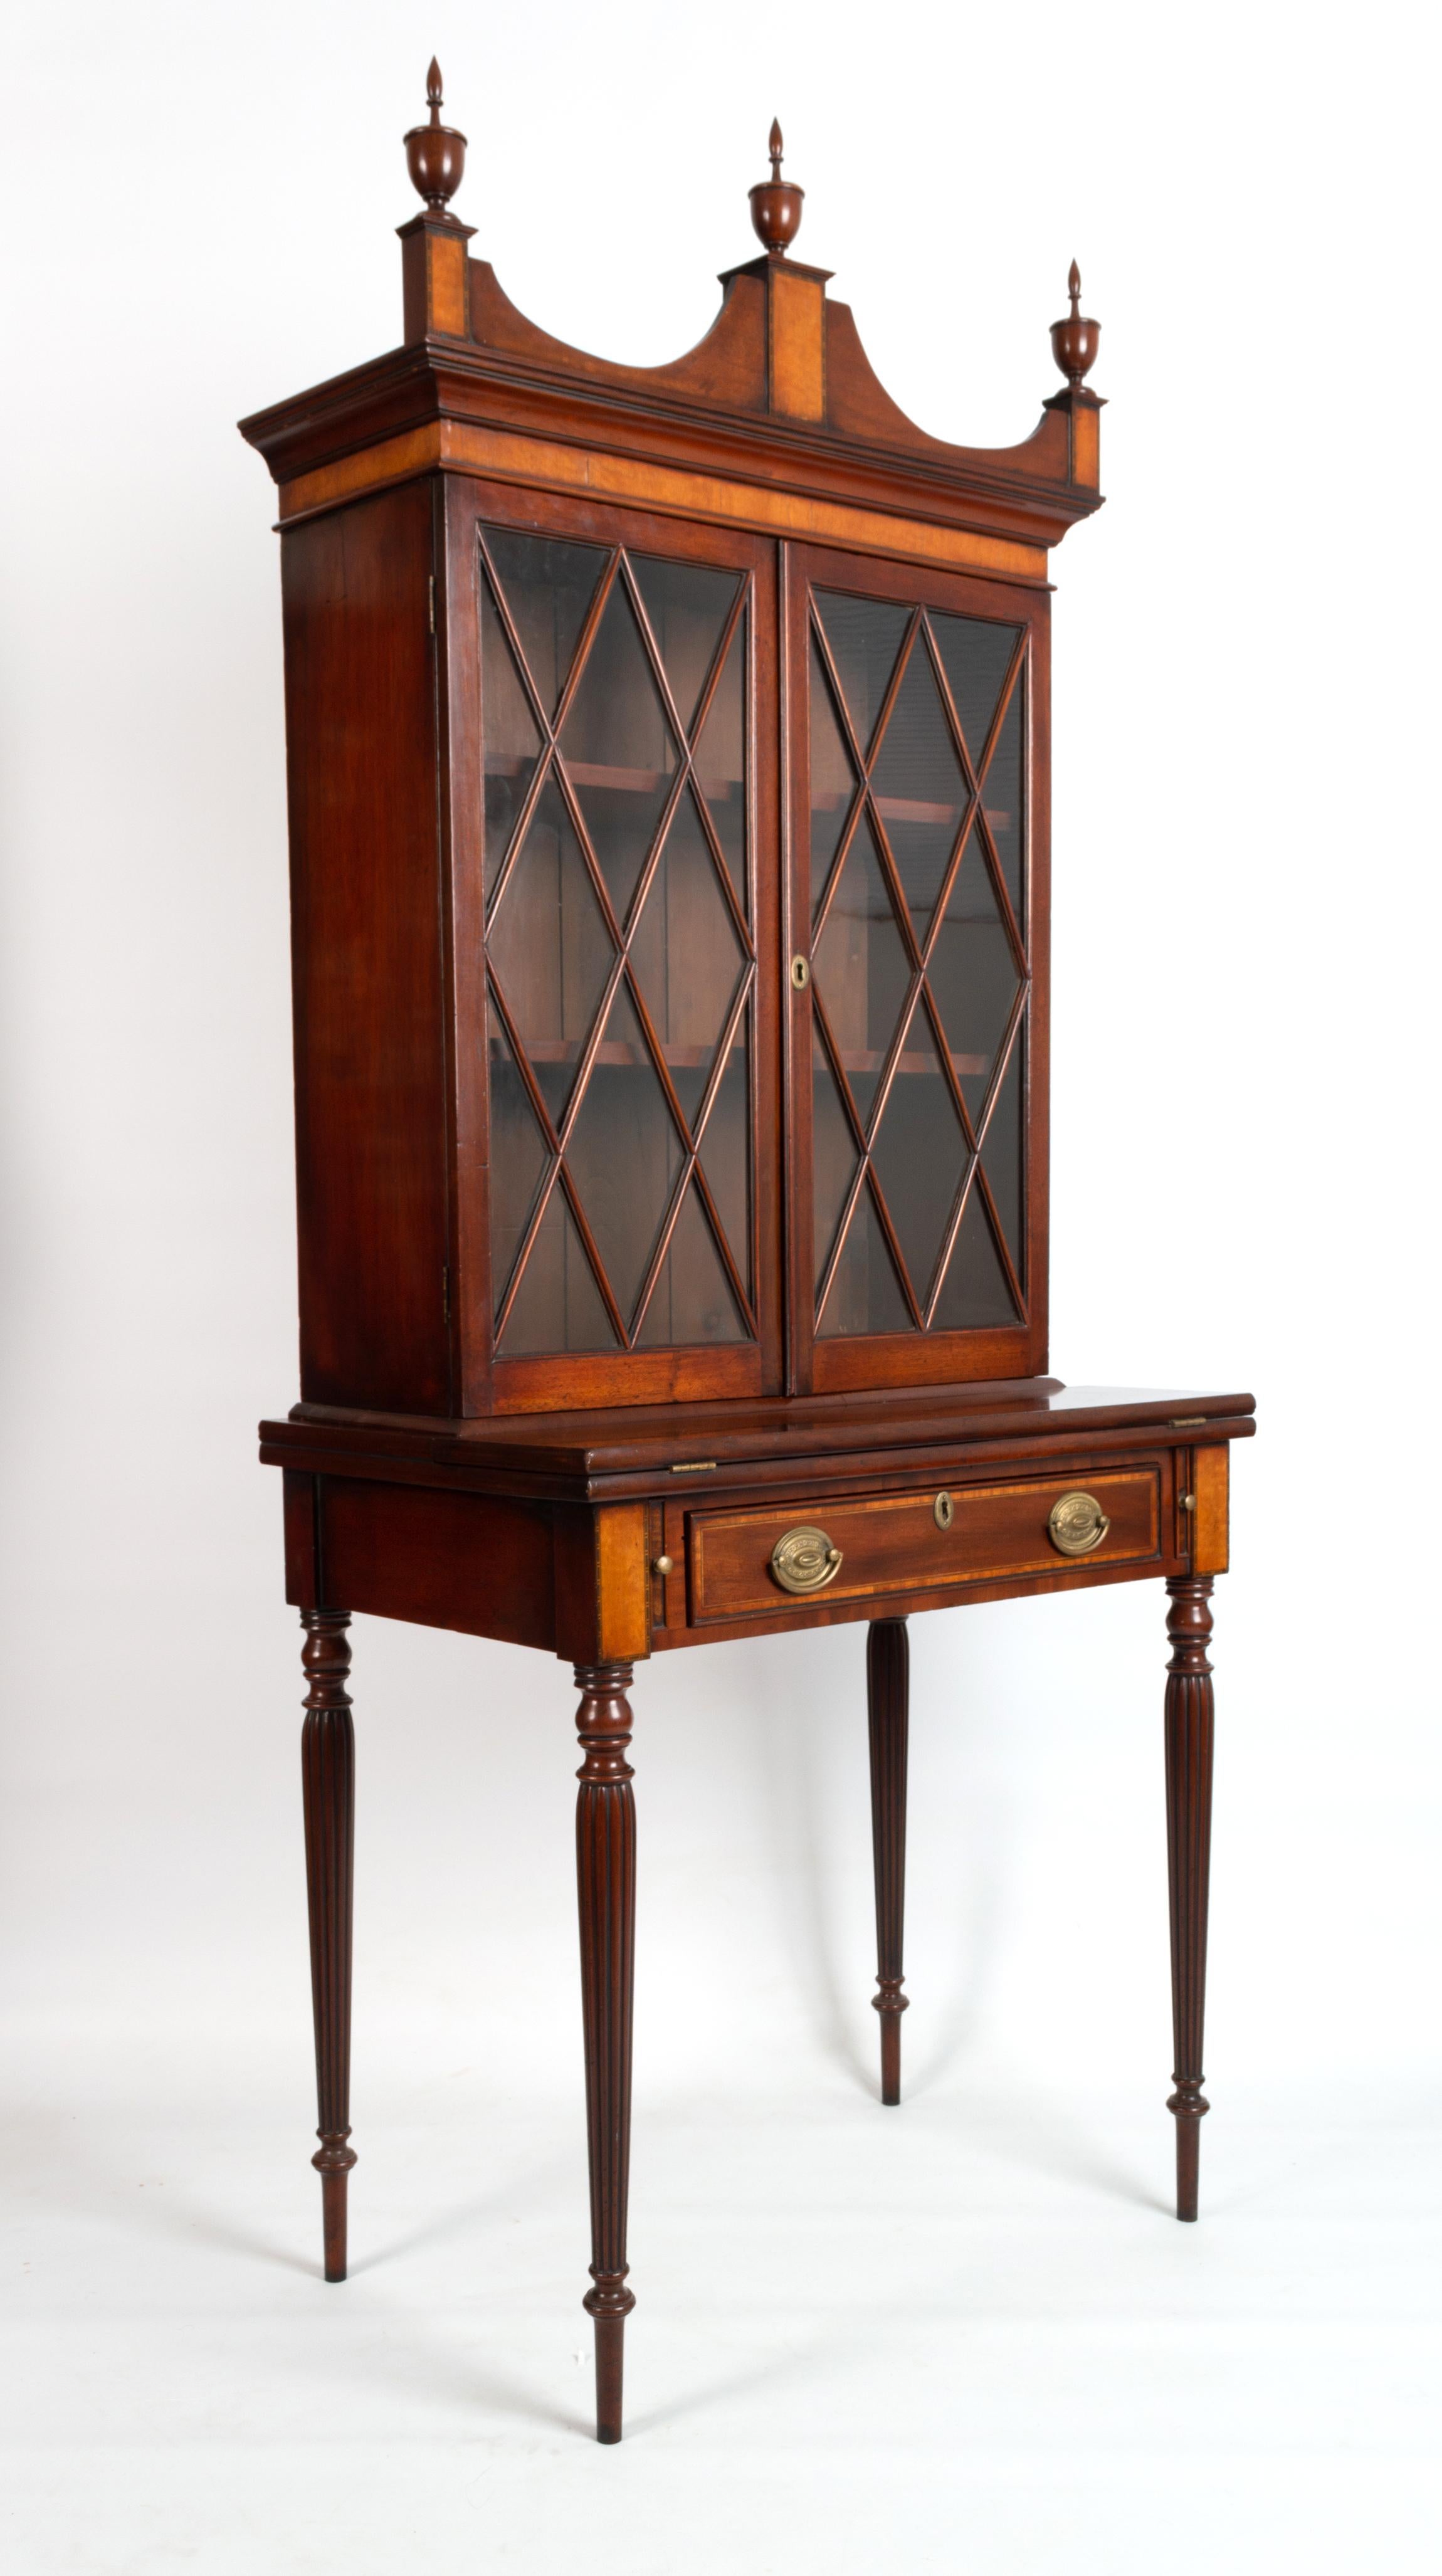 Antique English 19th century Sheraton revival mahogany display cabinet on stand.

A 19th century mahogany display cabinet on stand, the upper section with astragal glazed doors on a table base with fold out writing surface. Standing on turned